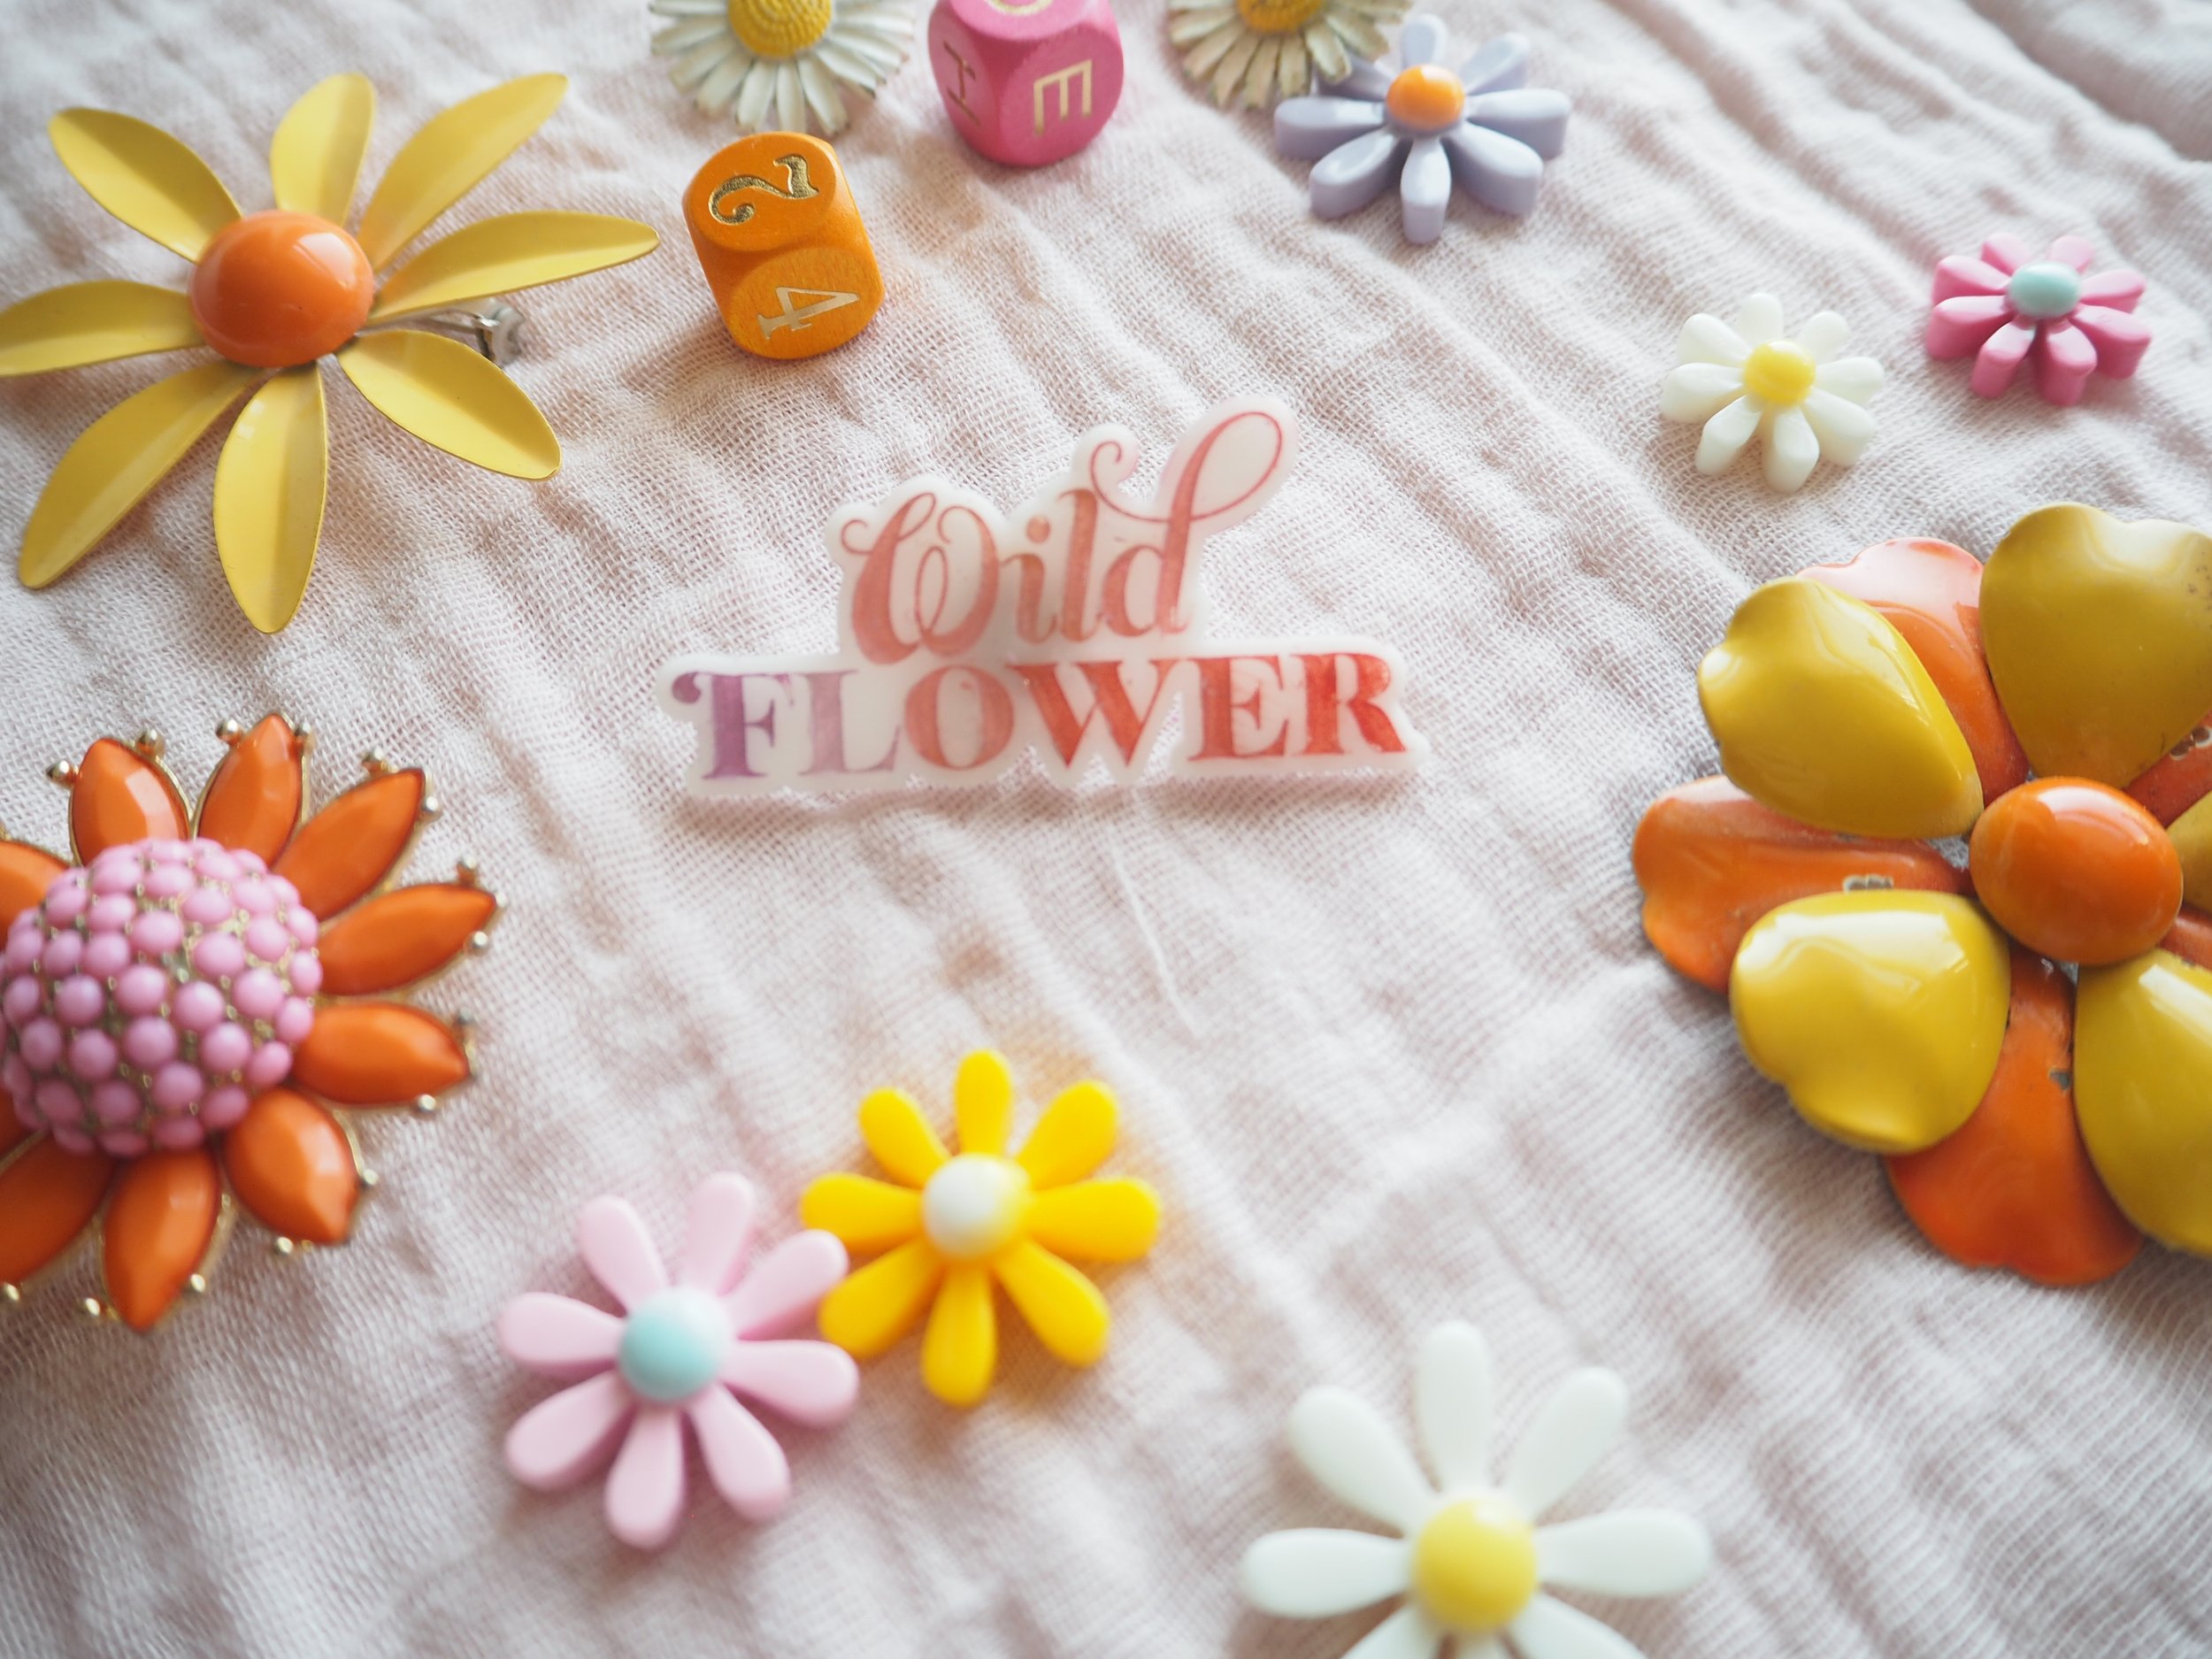 New Acrylic Broach Pins in the SHOP_090238.JPG